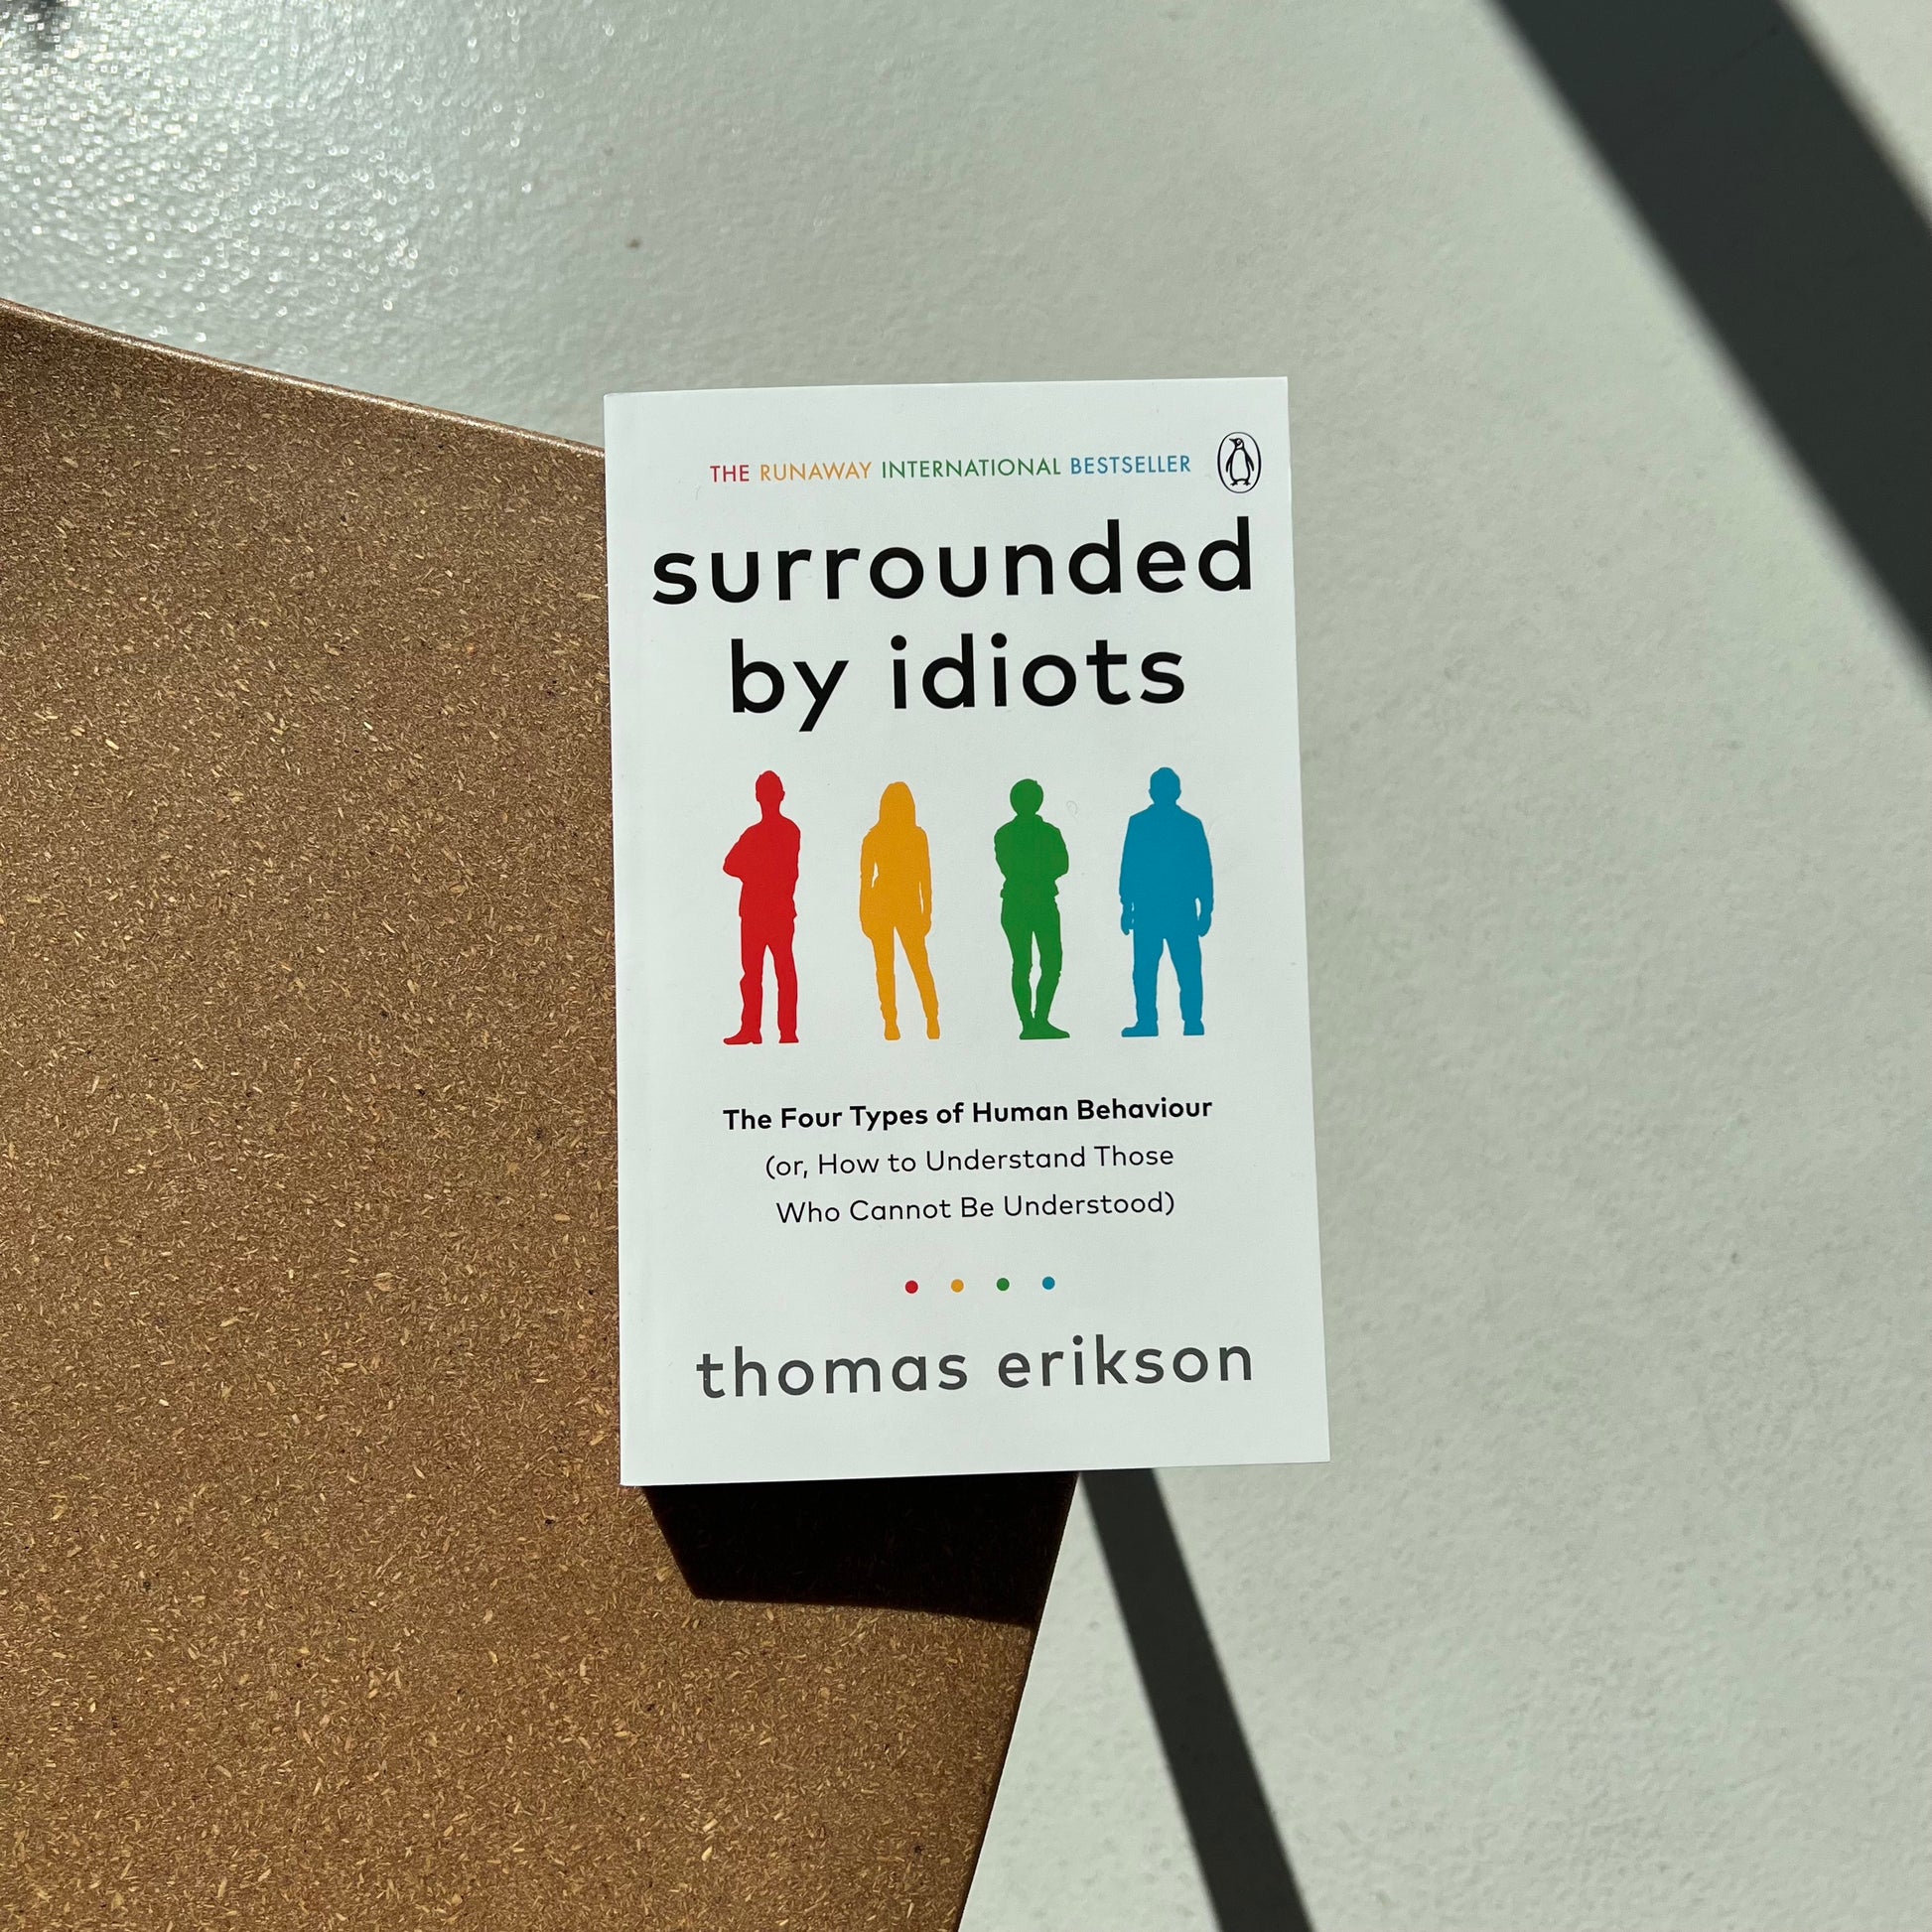 Surrounded By Idiots by Thomas Erikson 